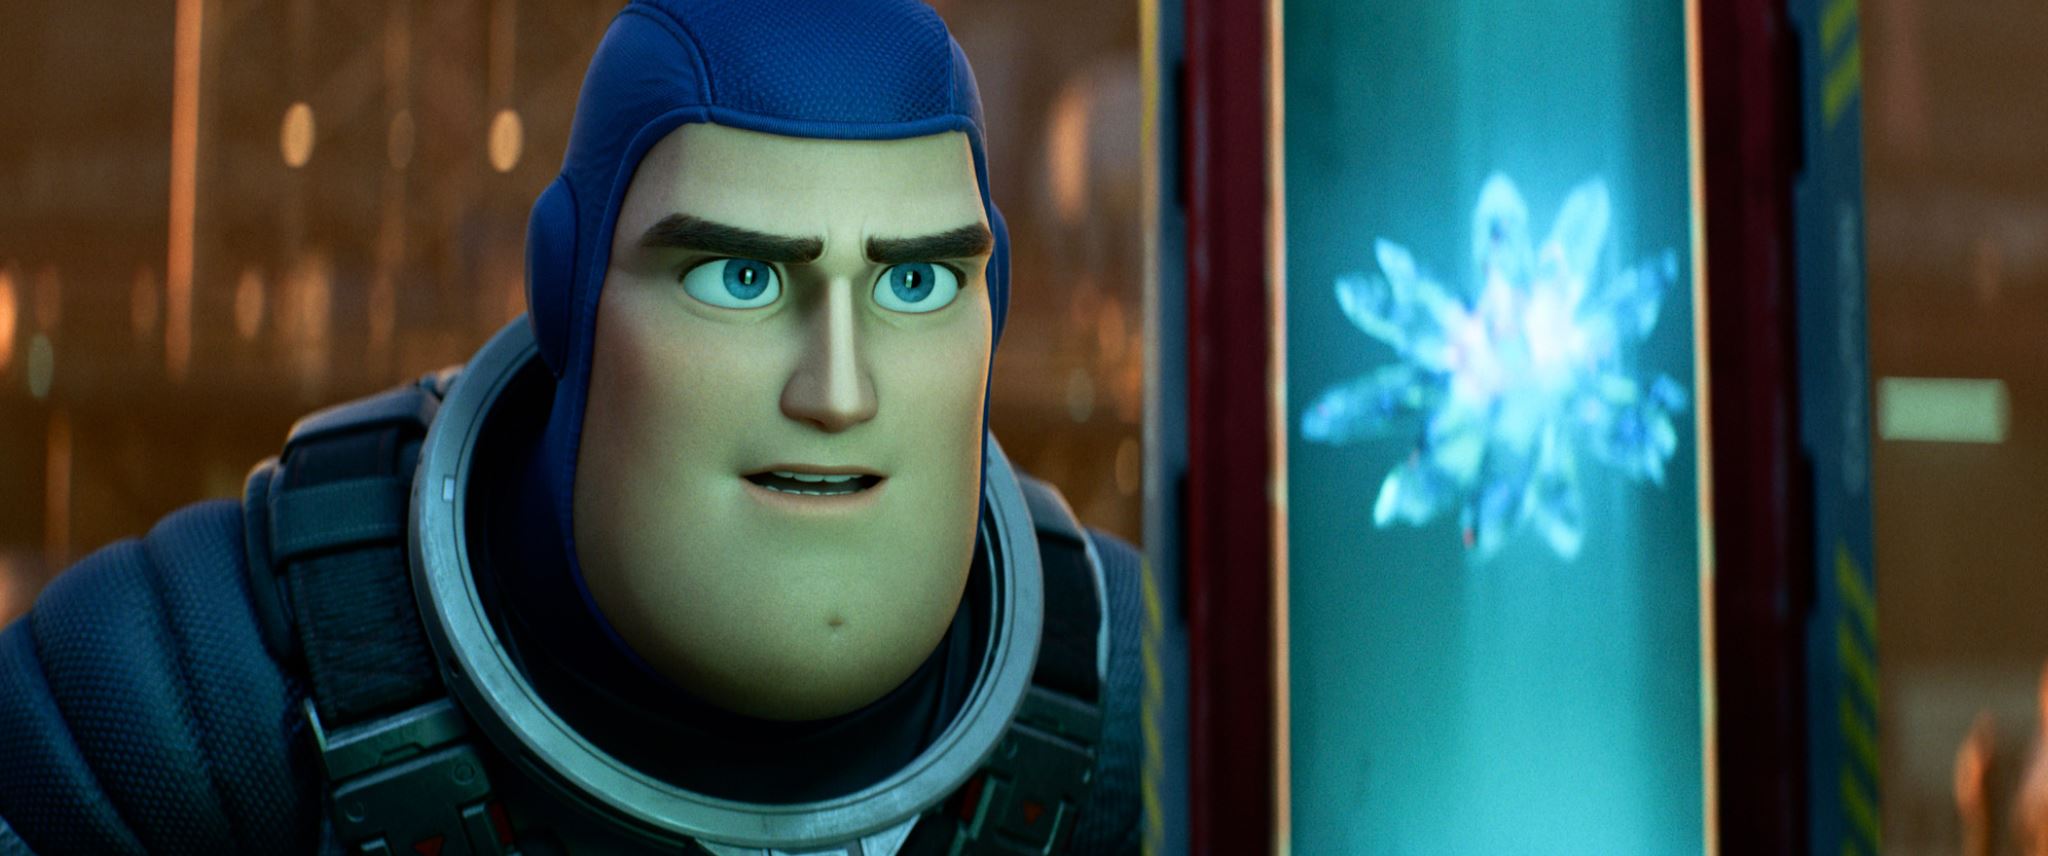 Disney's New Lightyear Trailer Blasts Off To Infinity And Beyond - Cinelinx  | Movies. Games. Geek Culture.